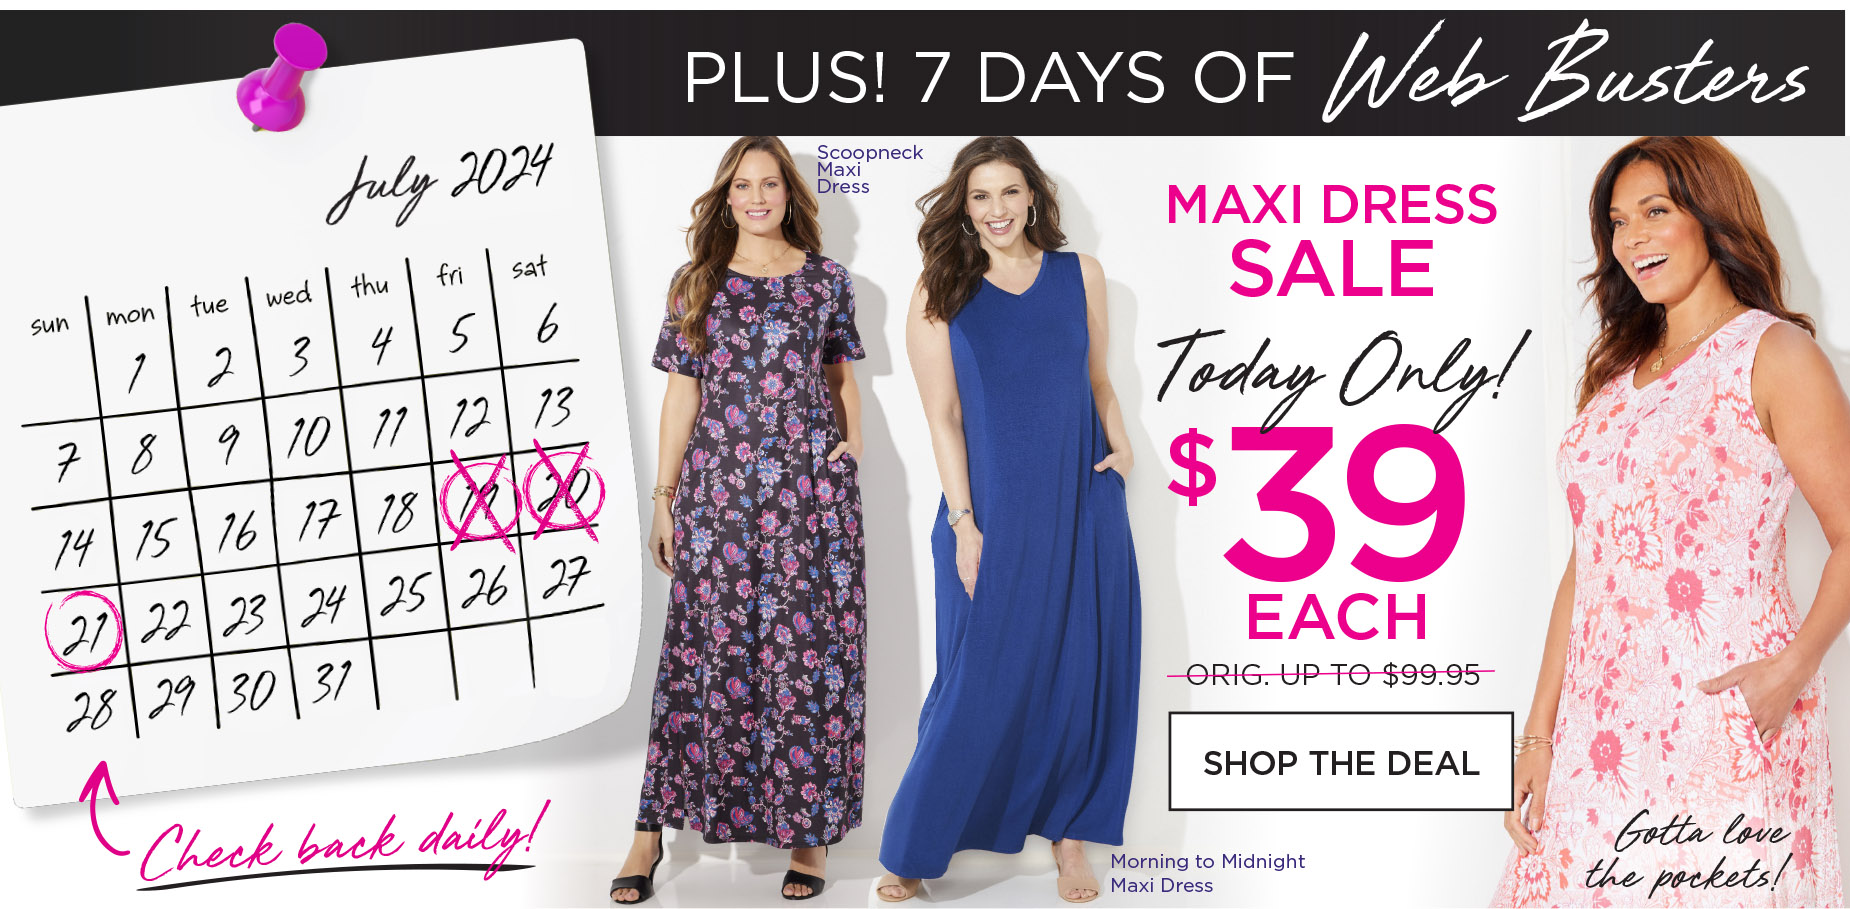 7 DAYS OF WEB BUSTERS: Today only! Maxi Dress Sale $39 each